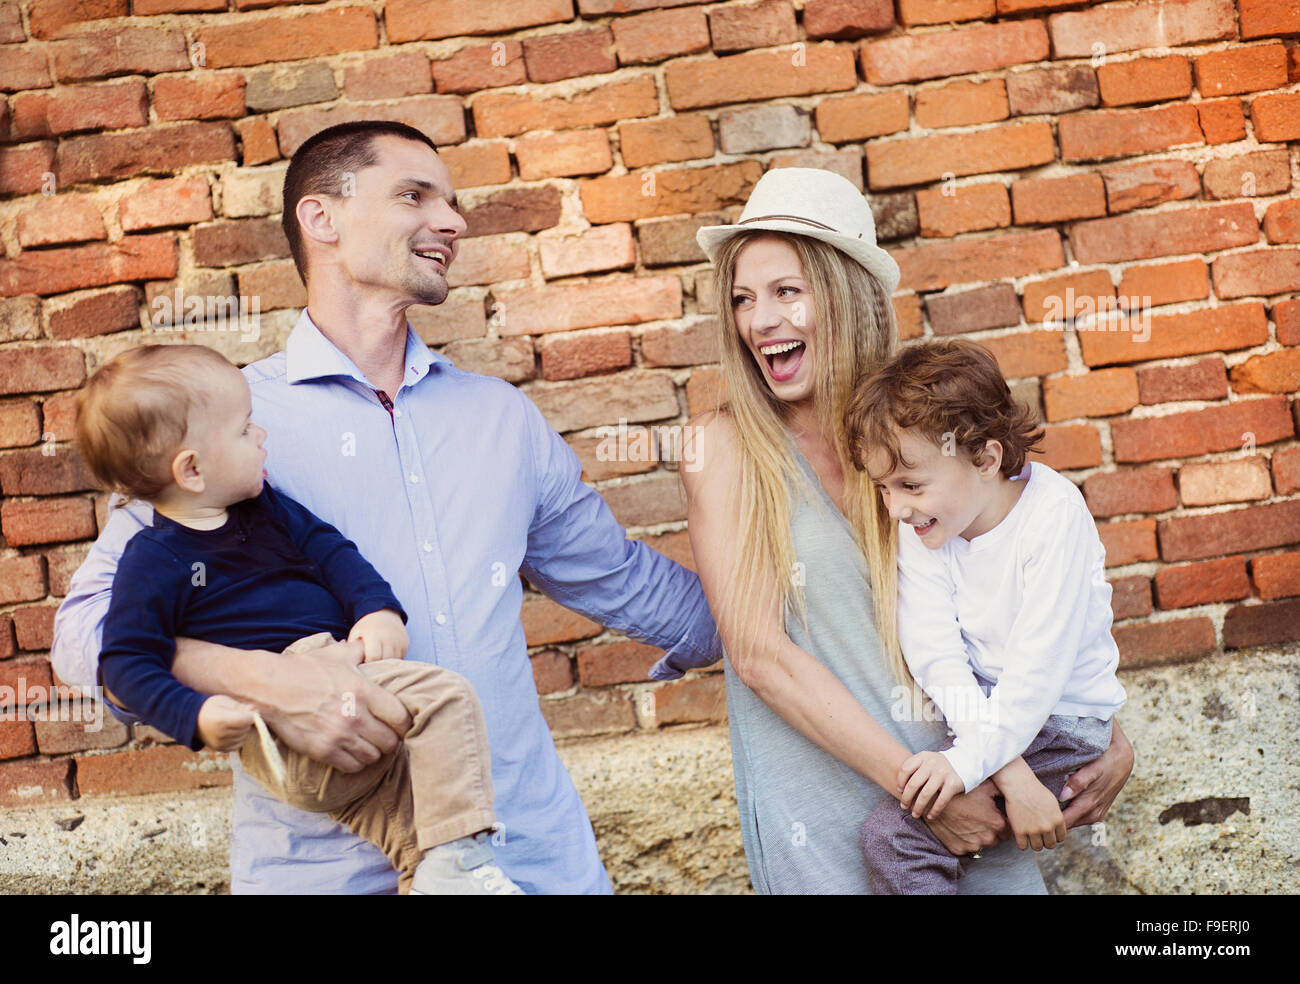 Happy young family spending time together outside by the brick wall. Stock Photo